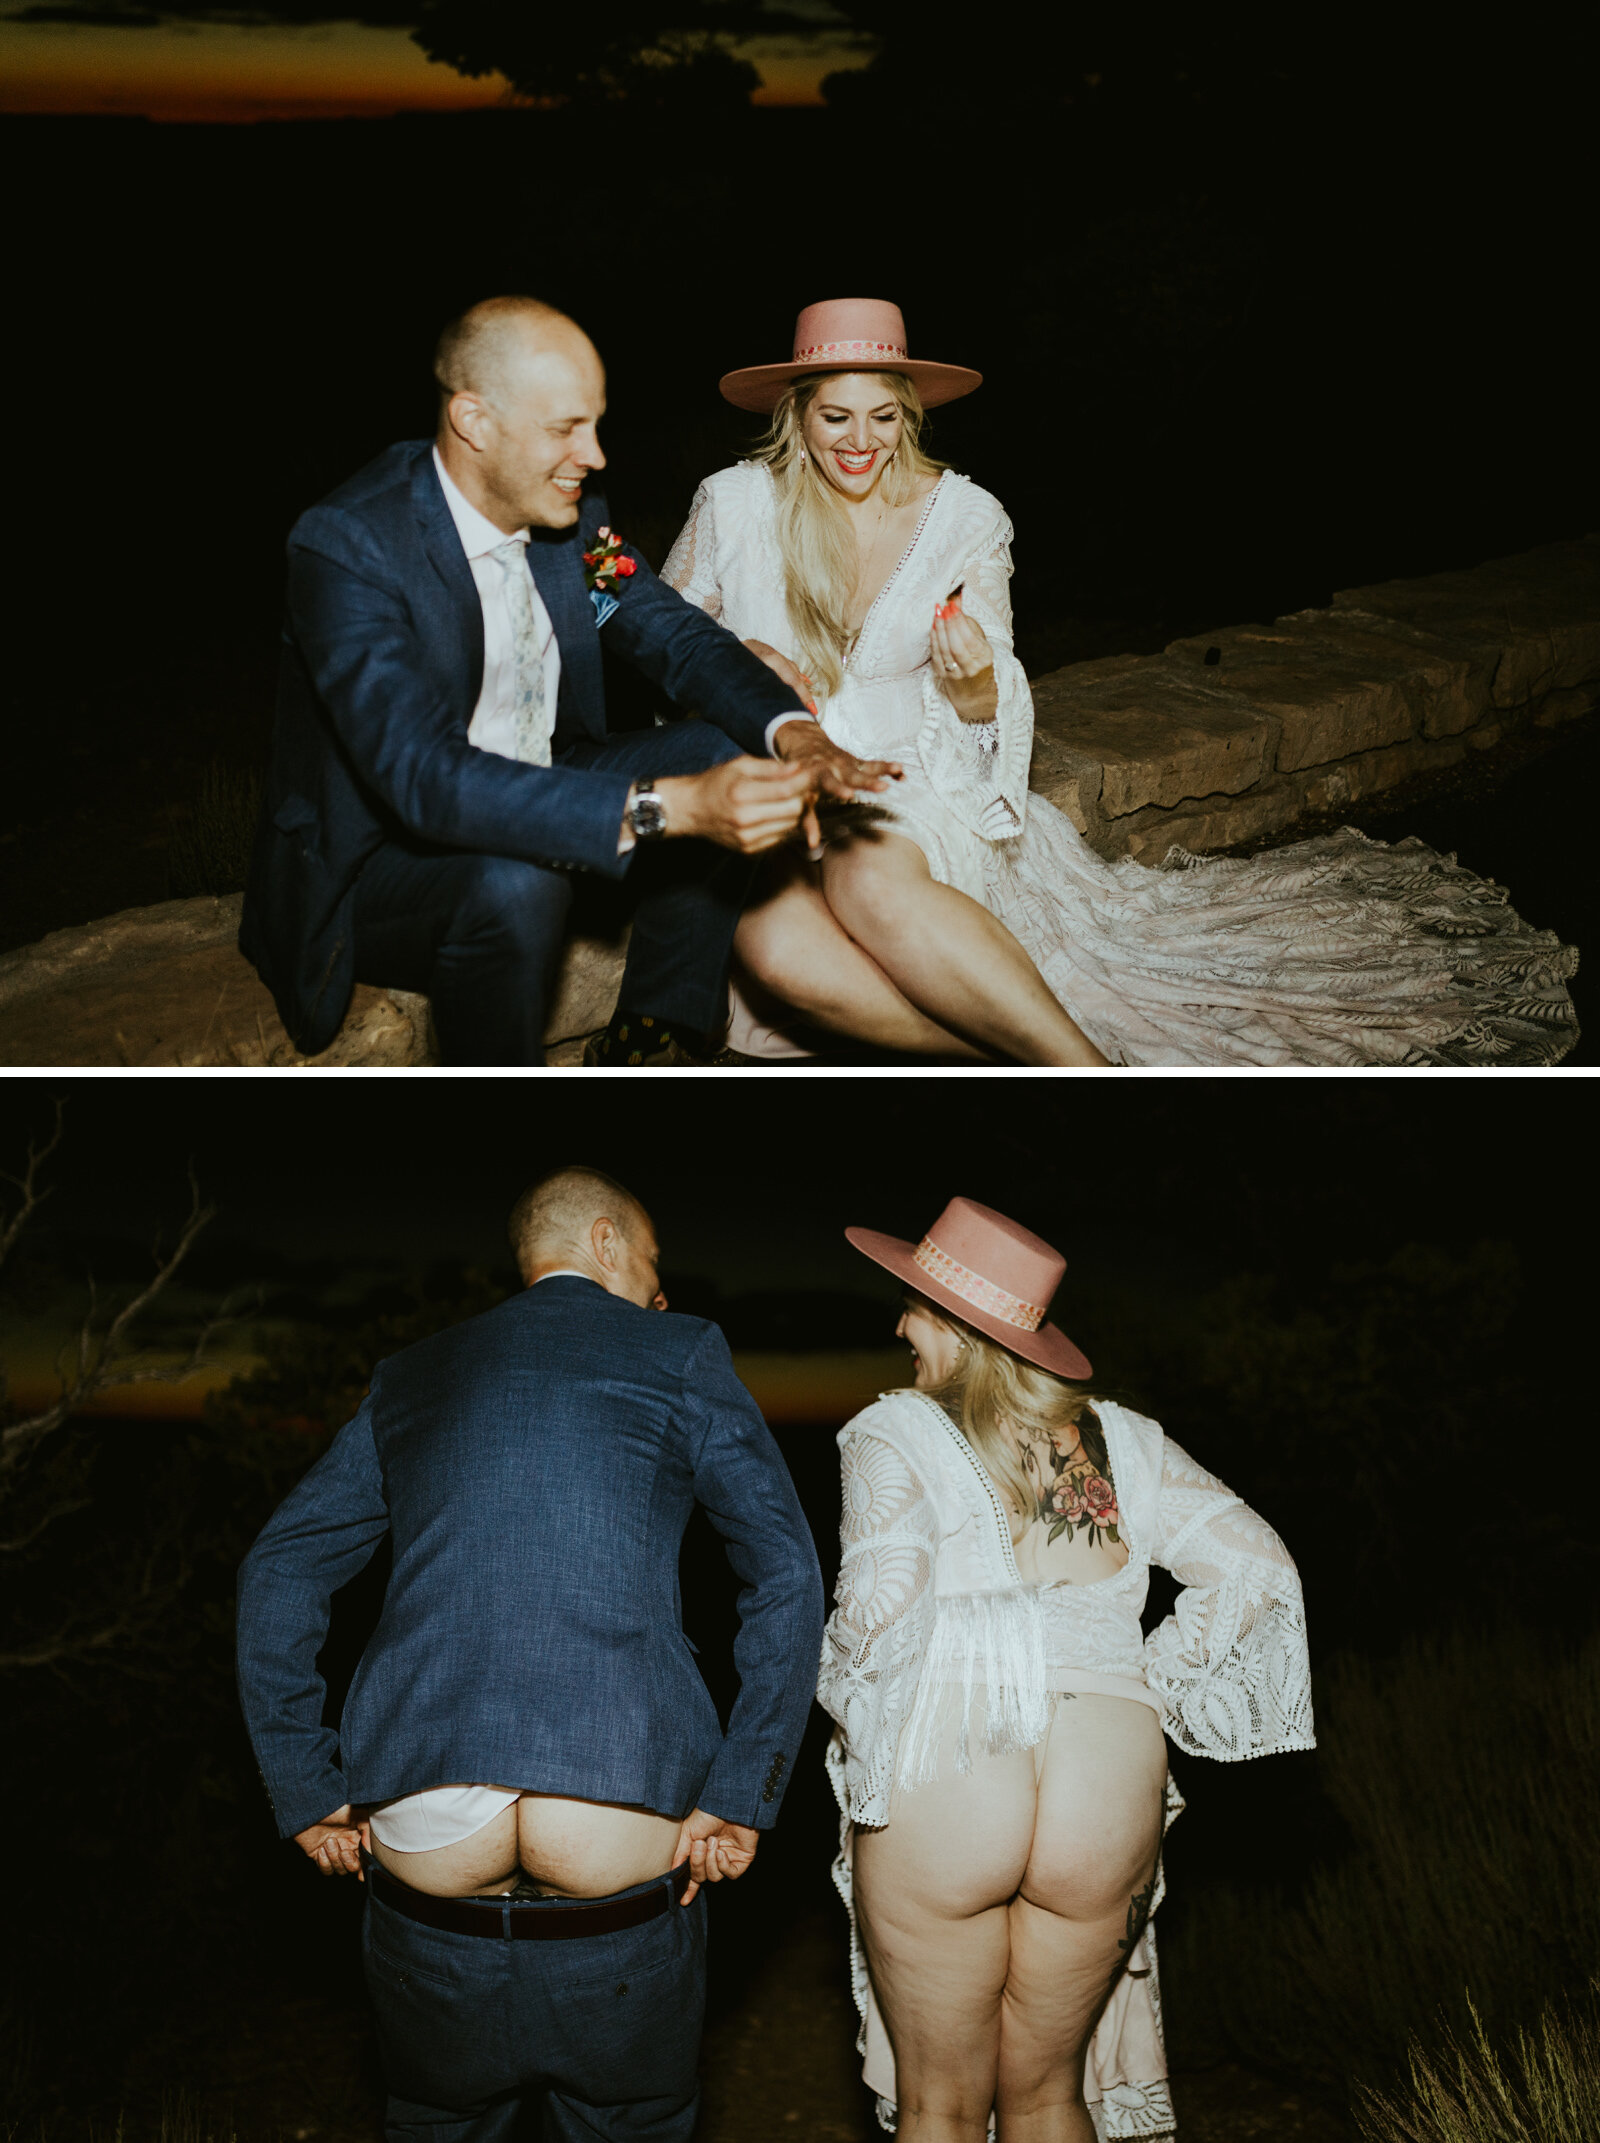 moran point grand canyon national park arizona elopement photography bibiluxe dress with fringe tassels boho bride inspiration boho wedding style inspo 420 friendly bride and groom silly bride and groom photos booty couple mooning camera .jpg